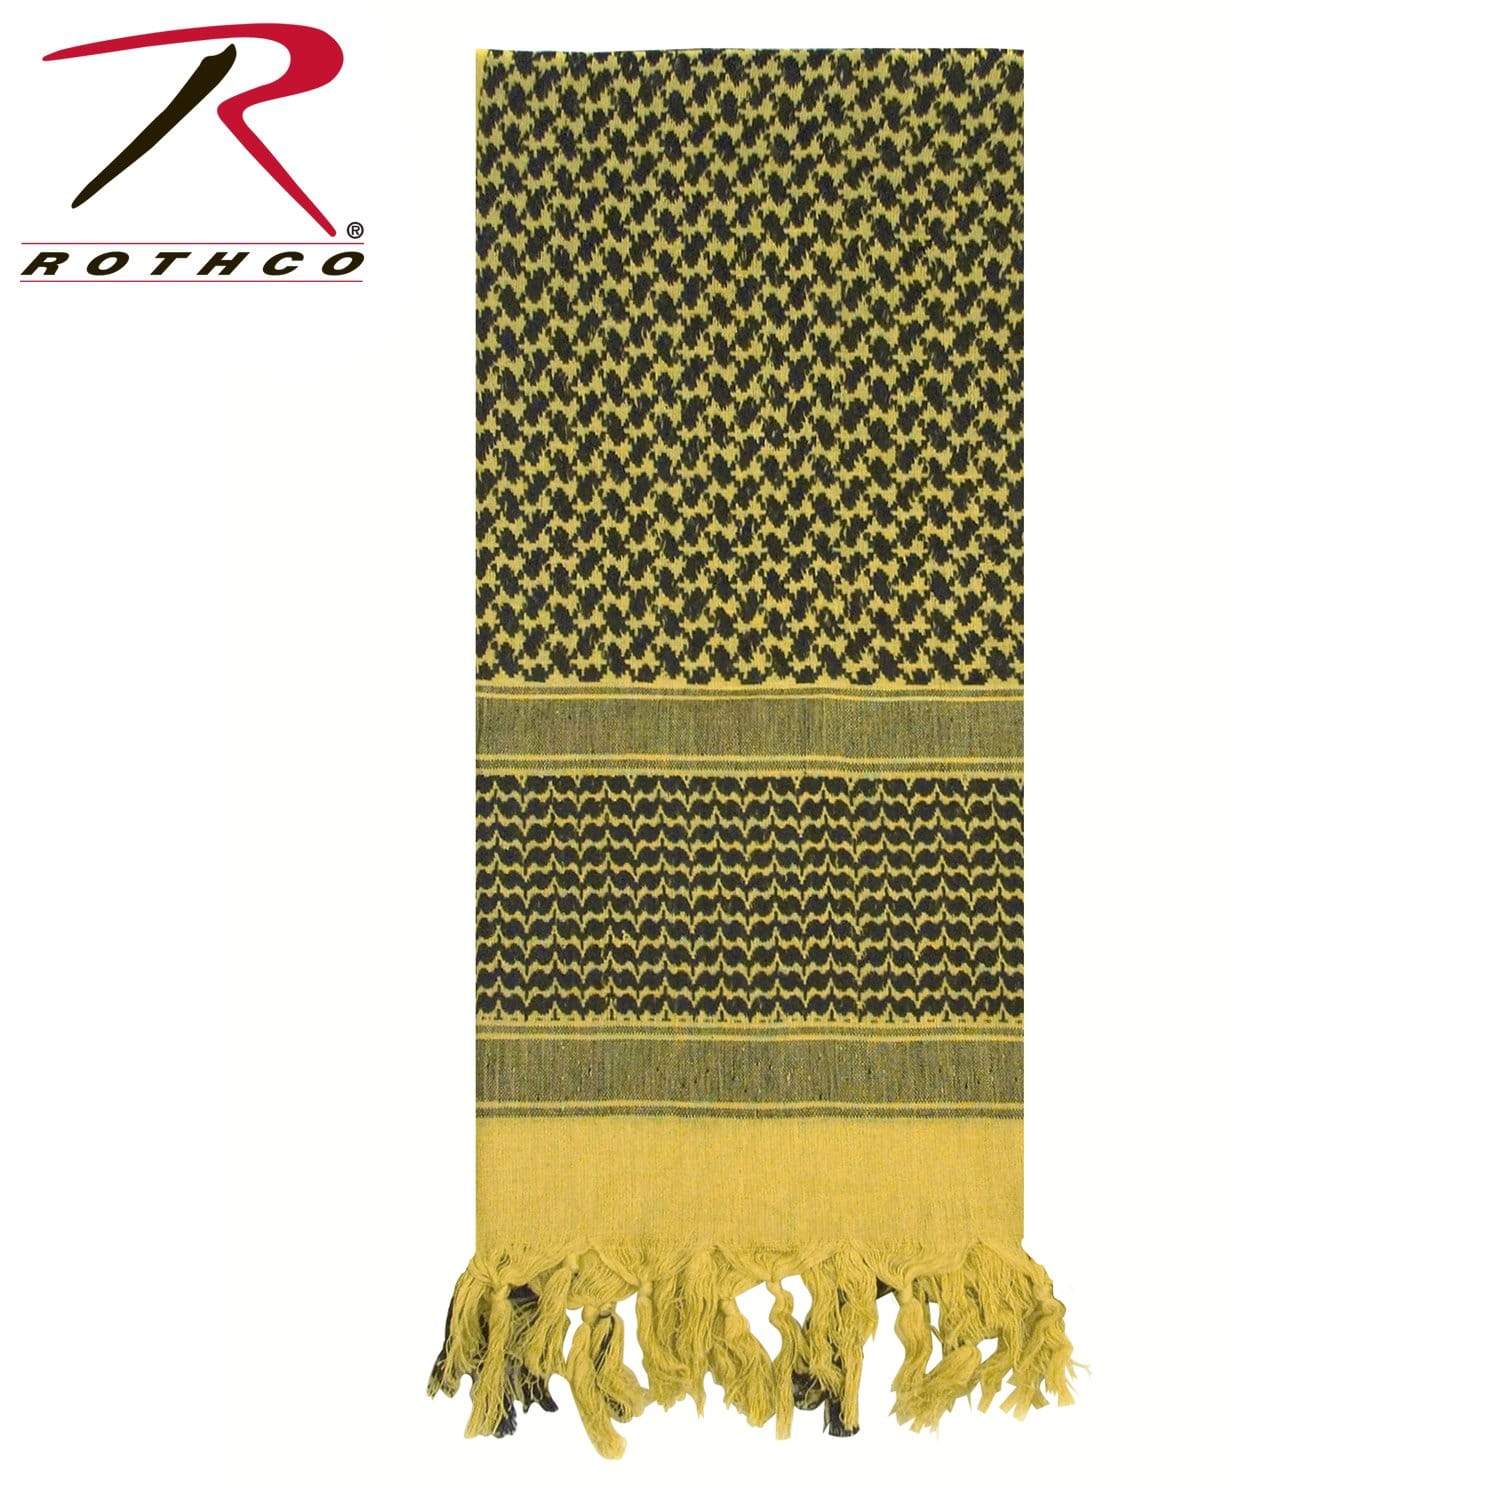 Rothco Shemagh Tactical Desert Keffiyeh Scarf - Desert Sand - Eminent Paintball And Airsoft